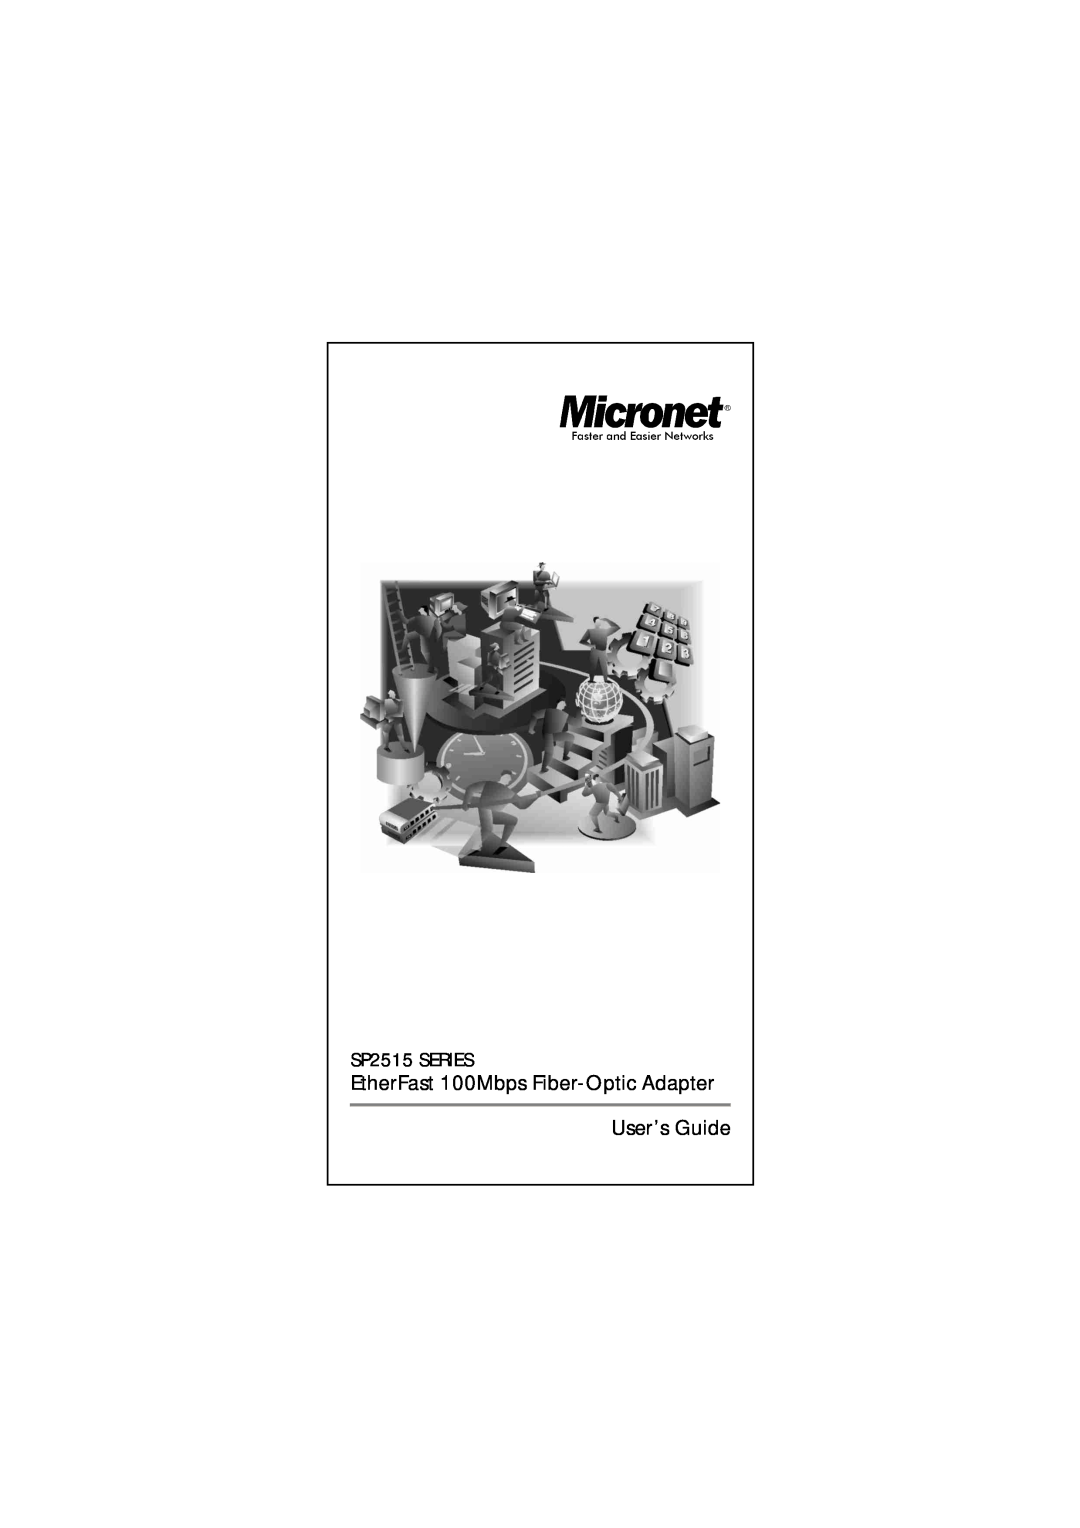 MicroNet Technology SP2515 SERIES manual EtherFast 100Mbps Fiber-Optic Adapter User’s Guide 